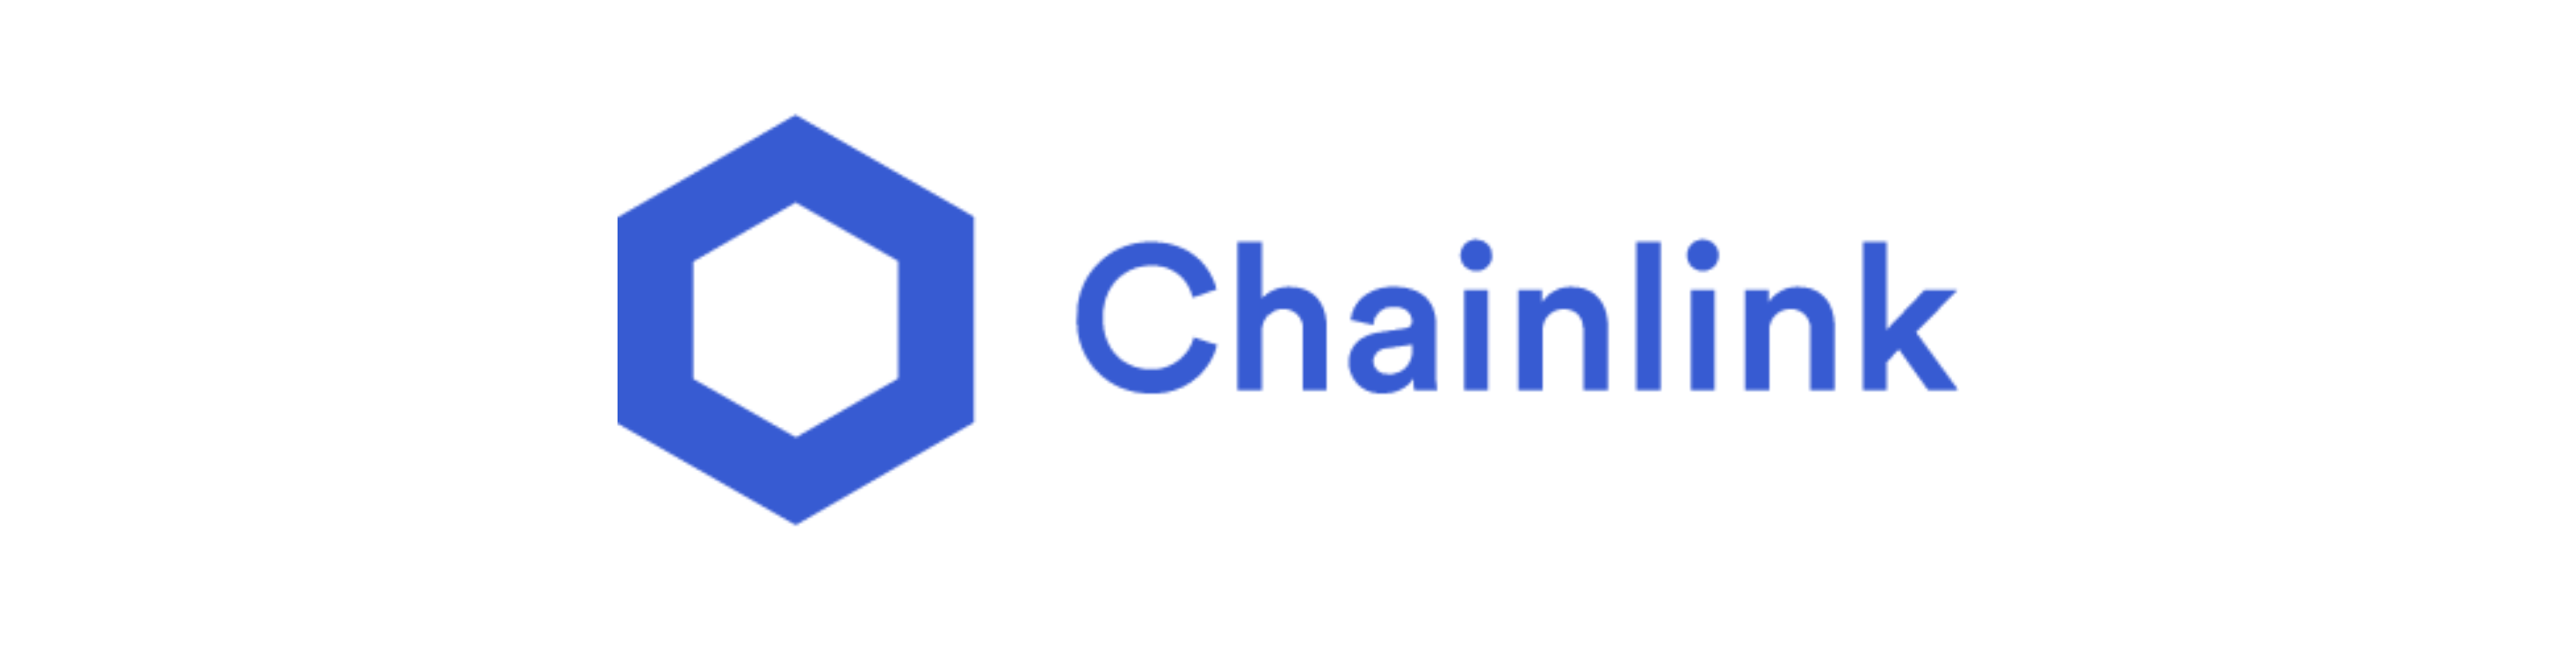 Working at Chainlink - Connect Smart Contracts to the Real World